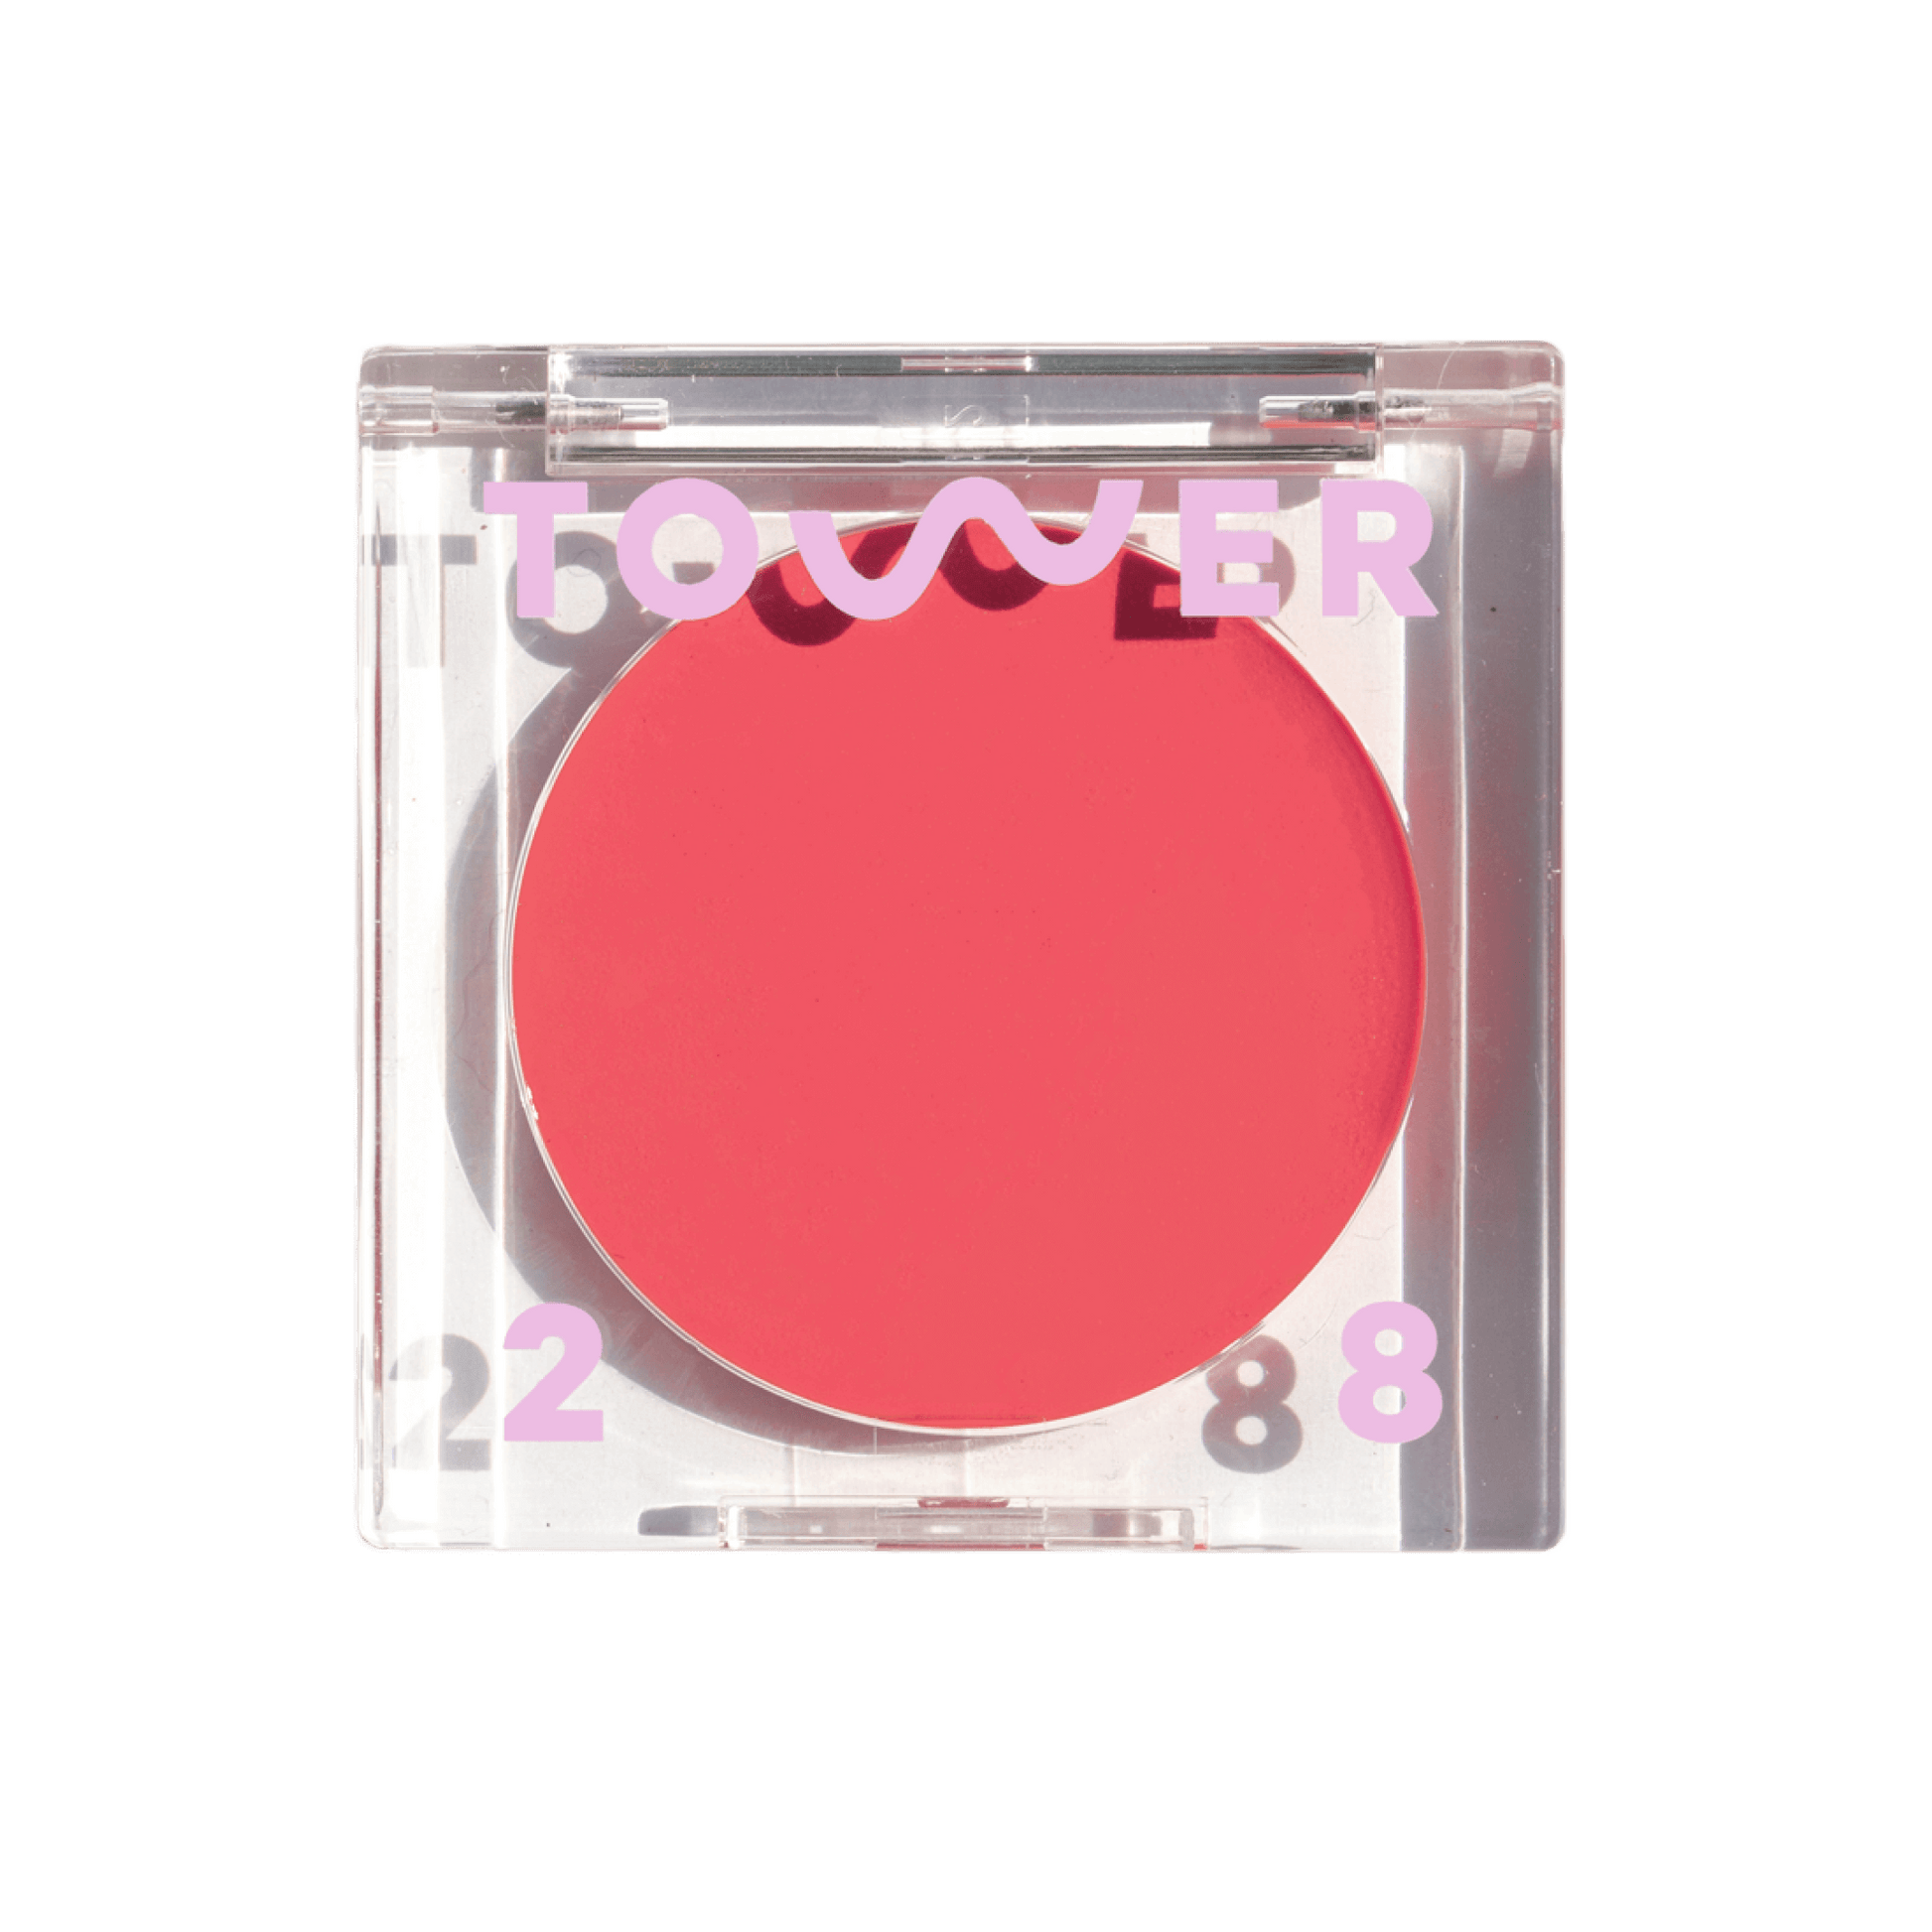 Tower 28 Beauty's BeachPlease Cream Blush in the shade Happy Hour